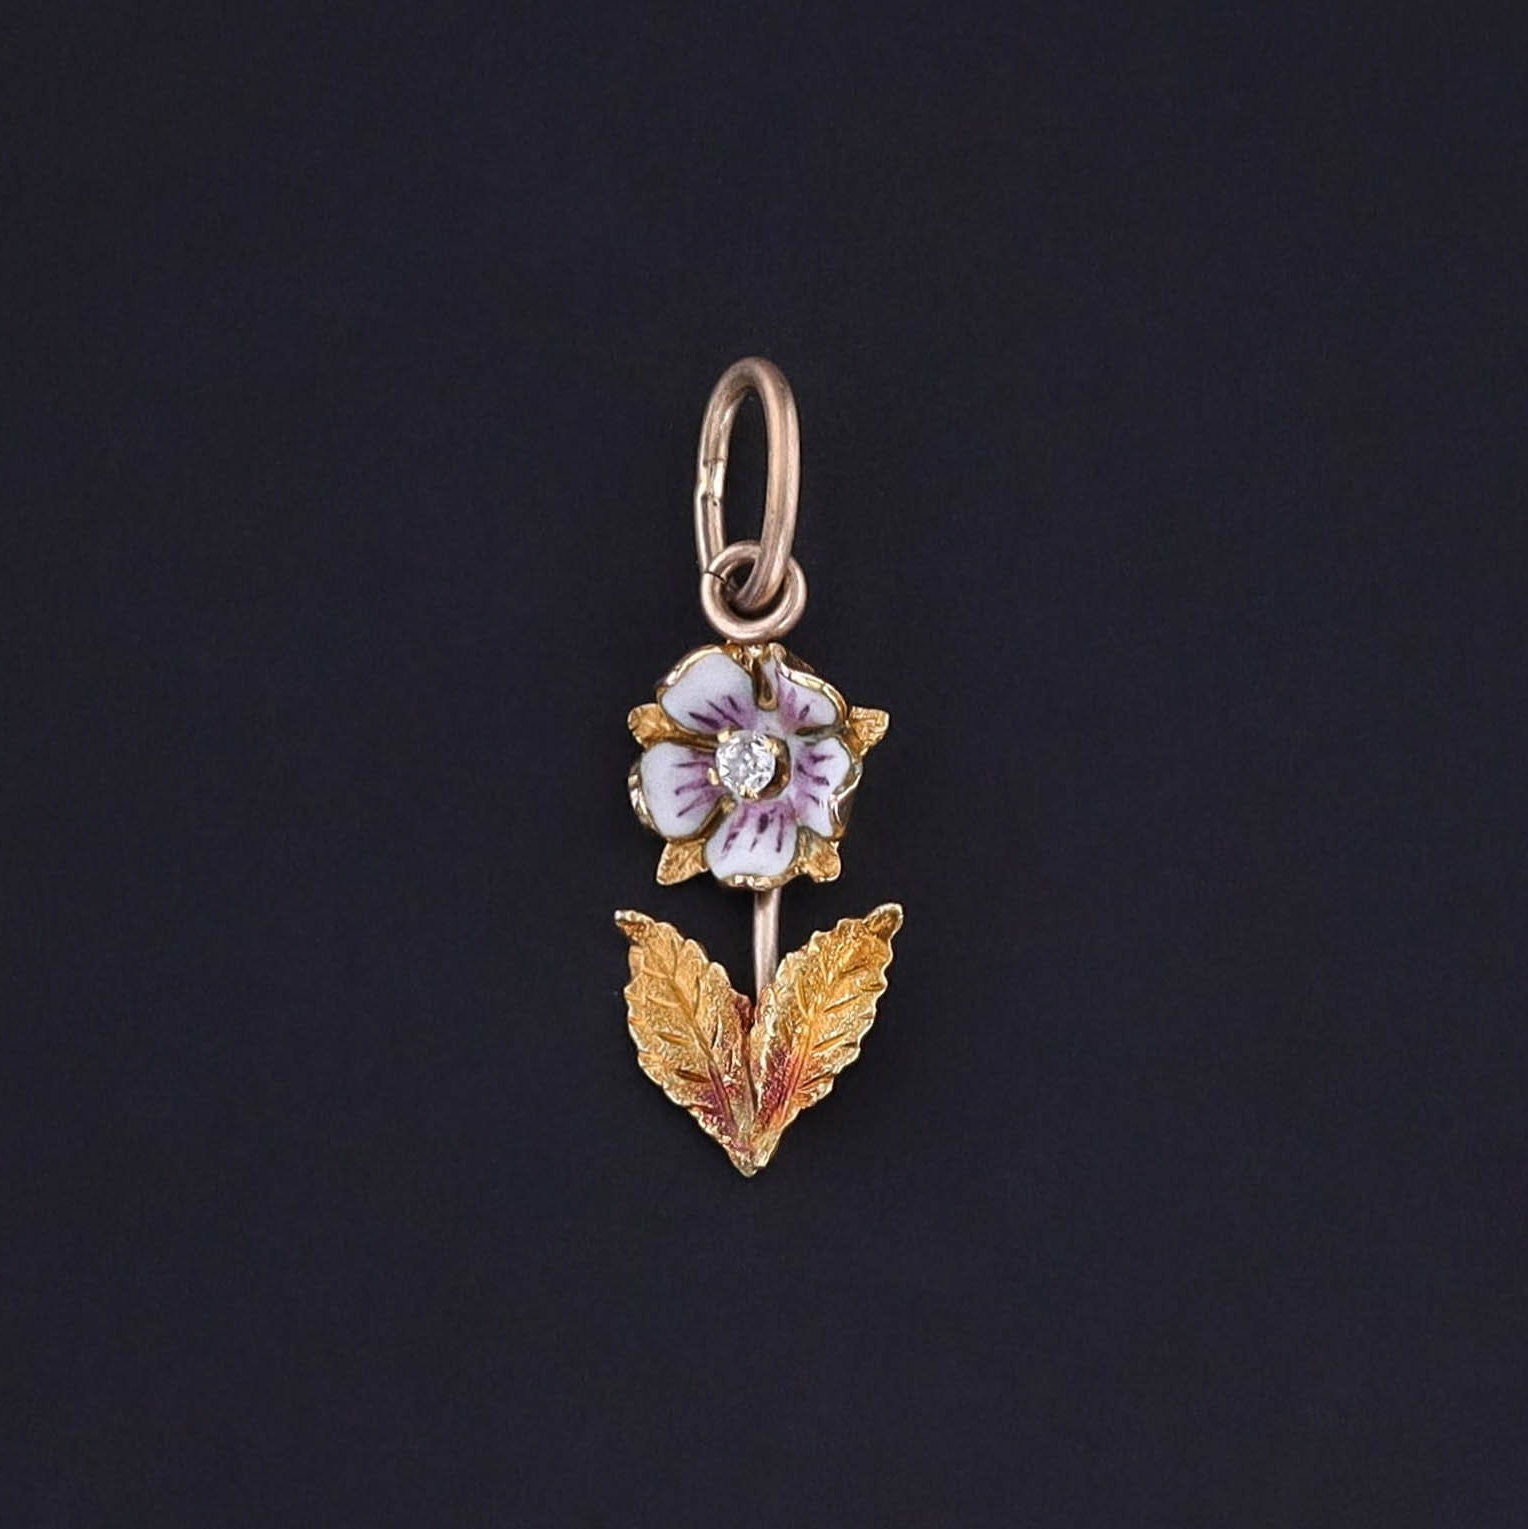 An antique purple enamel flower charm with golden leaves. The flower was originally part of an antique brooch circa 1900. It is in great condition. Perfect for any charm bracelet or charm necklace.